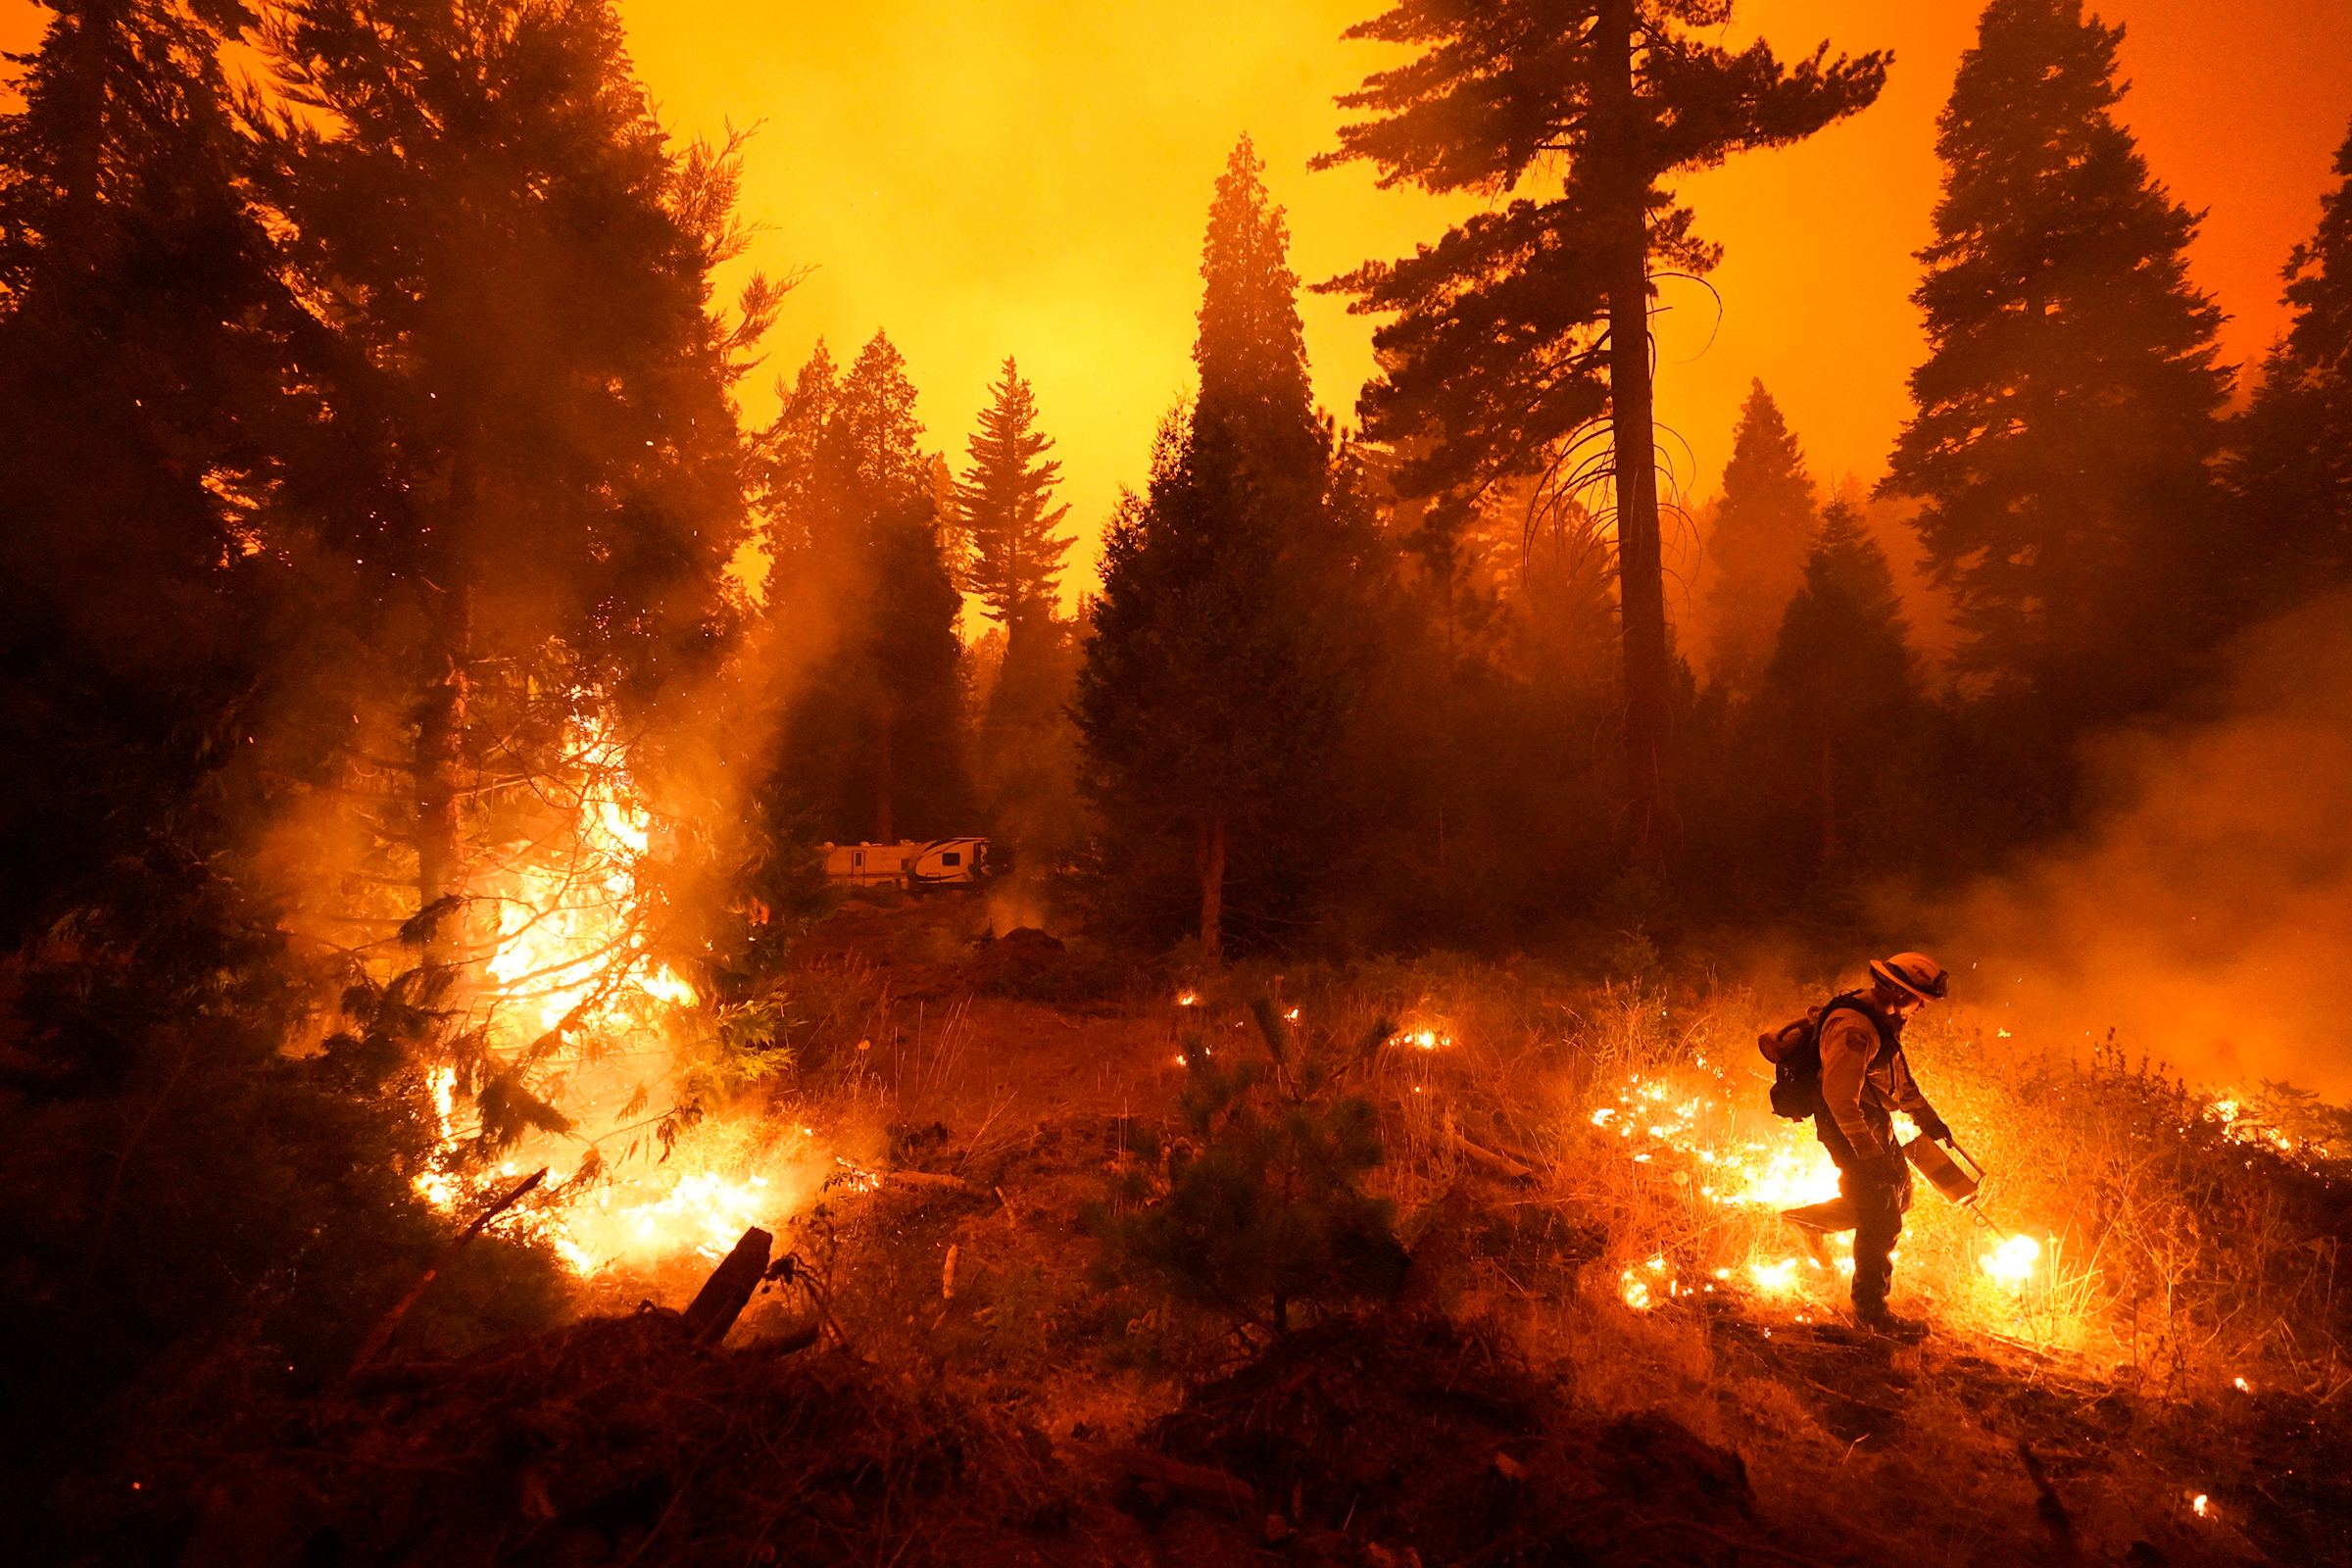 Firefighter Ricardo Gomez, of a San Benito Monterey Cal Fire crew, sets a controlled burn with a drip torch while fighting the Creek Fire in Shaver Lake, Calif., on Sept. 6, 2020.